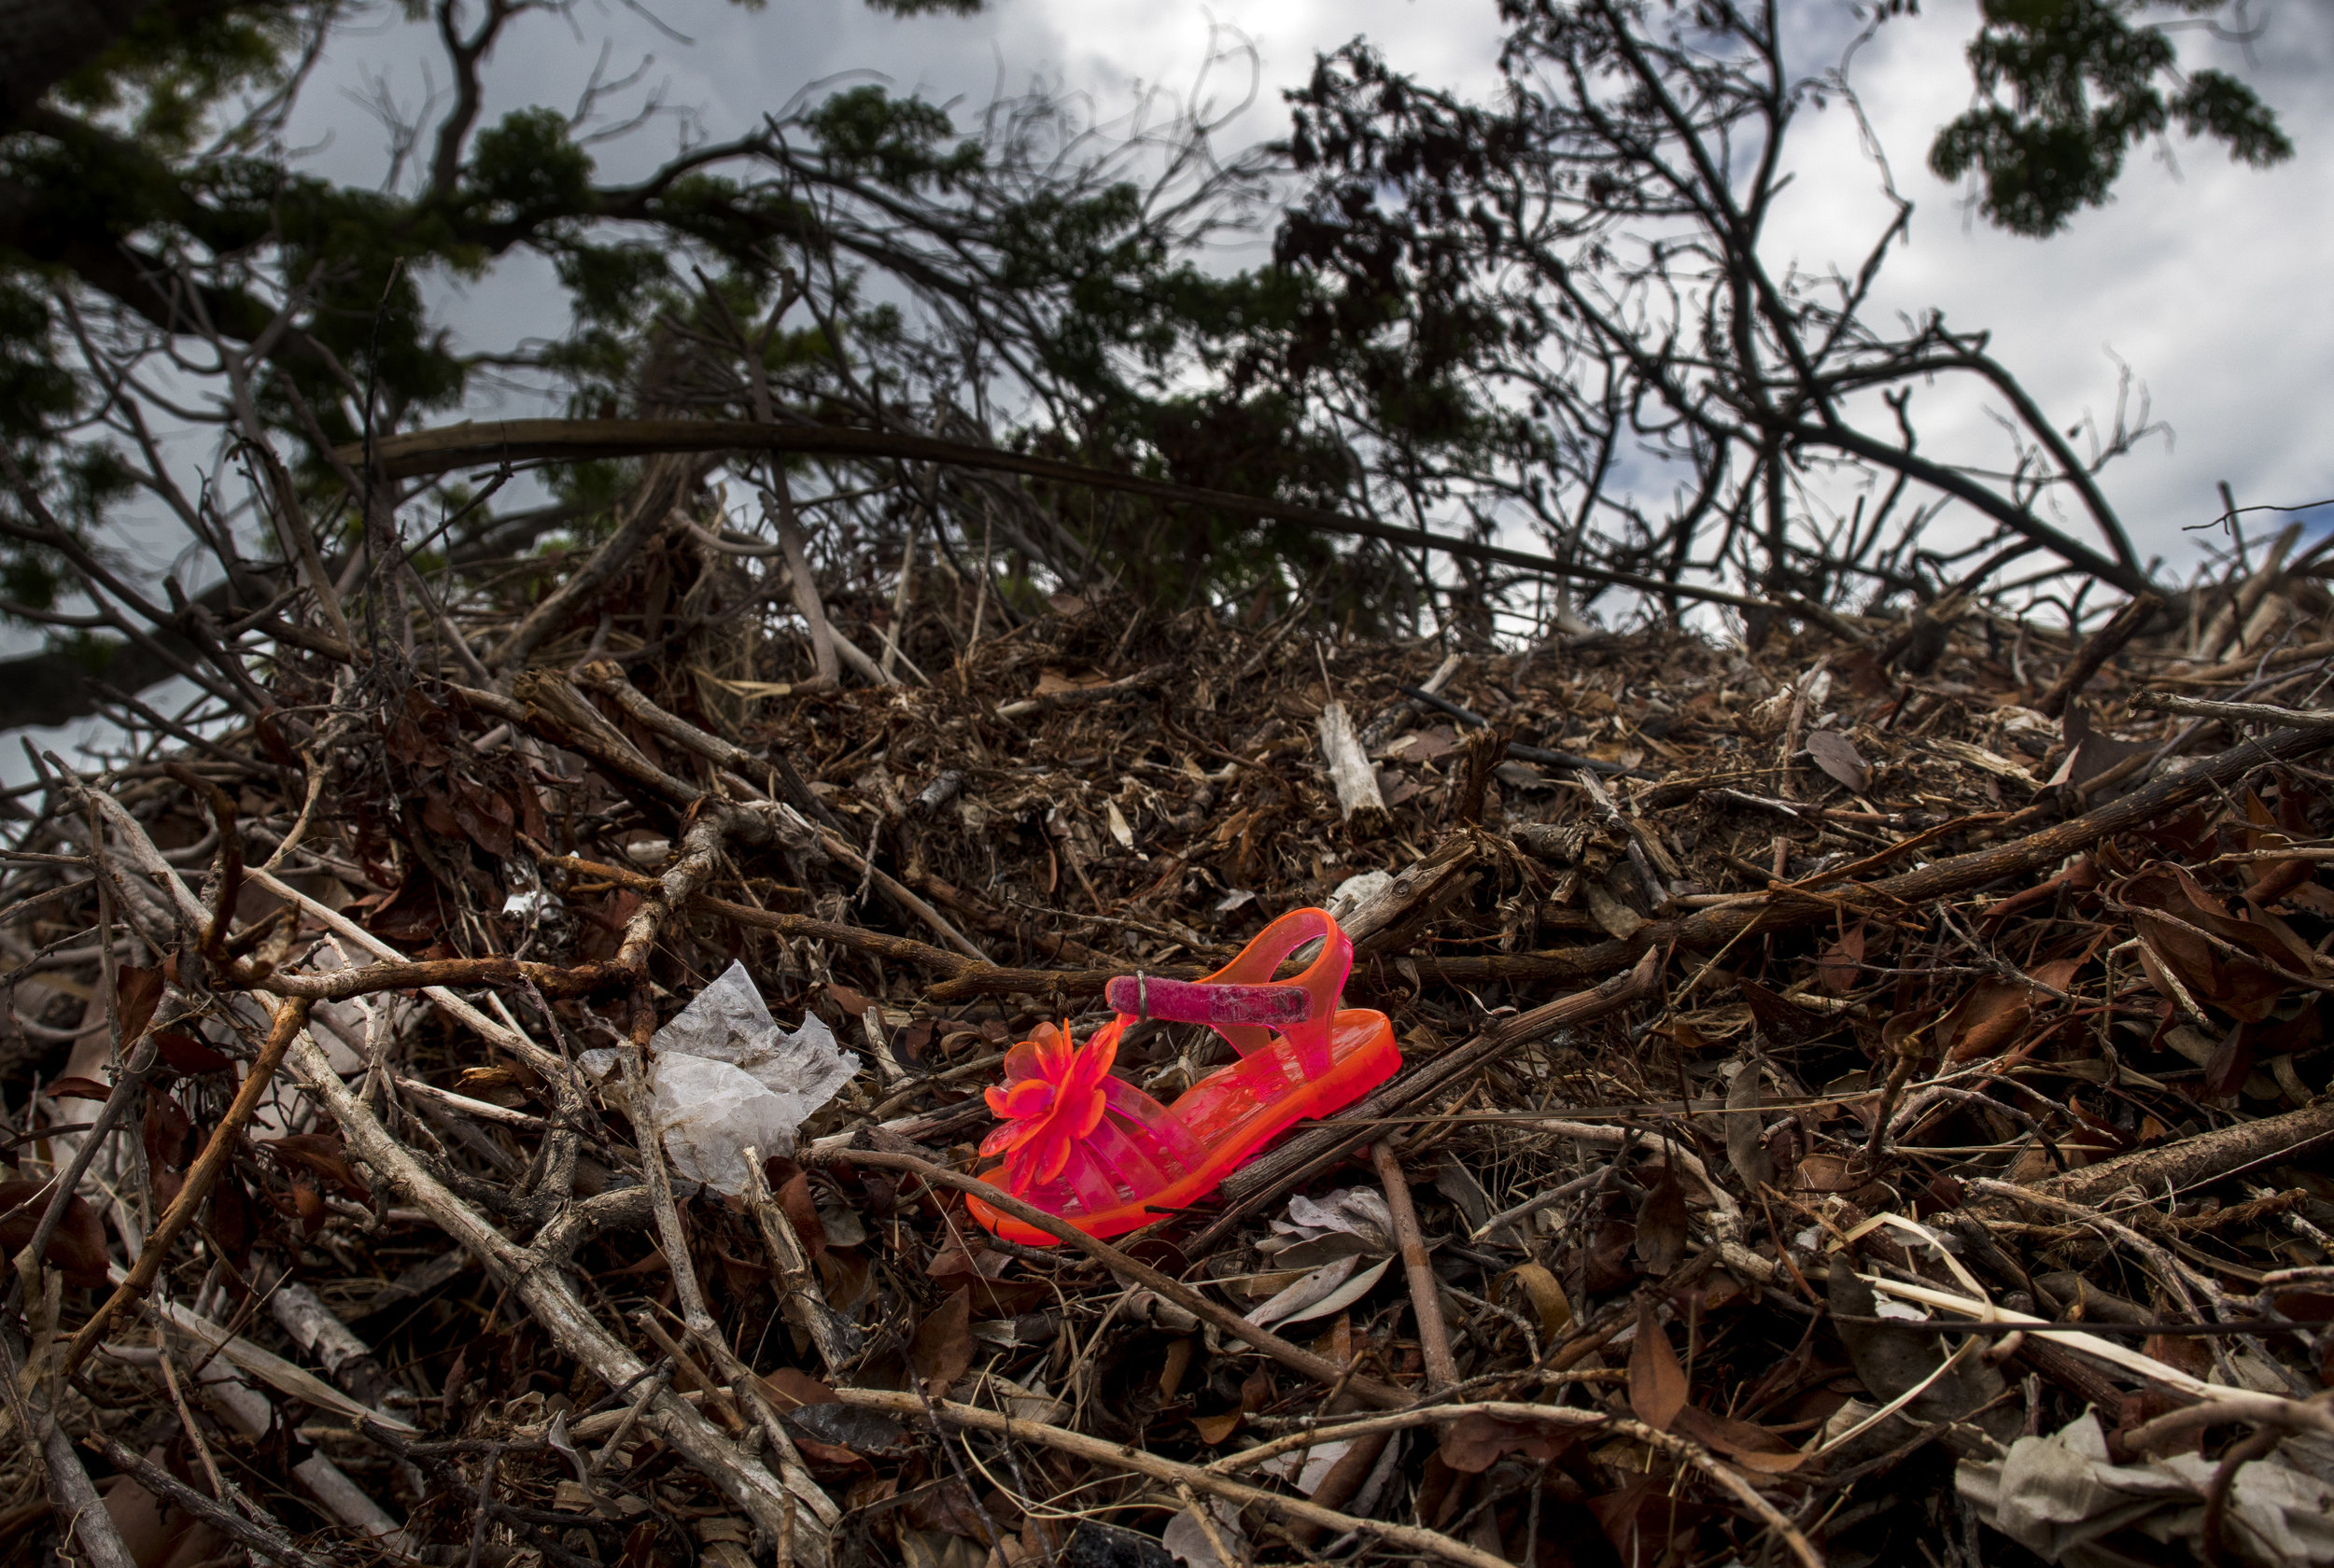  Trash and debris cover the Florida Keys, ranging in size from this tiny children's shoe all the way up to cars and large boats. 